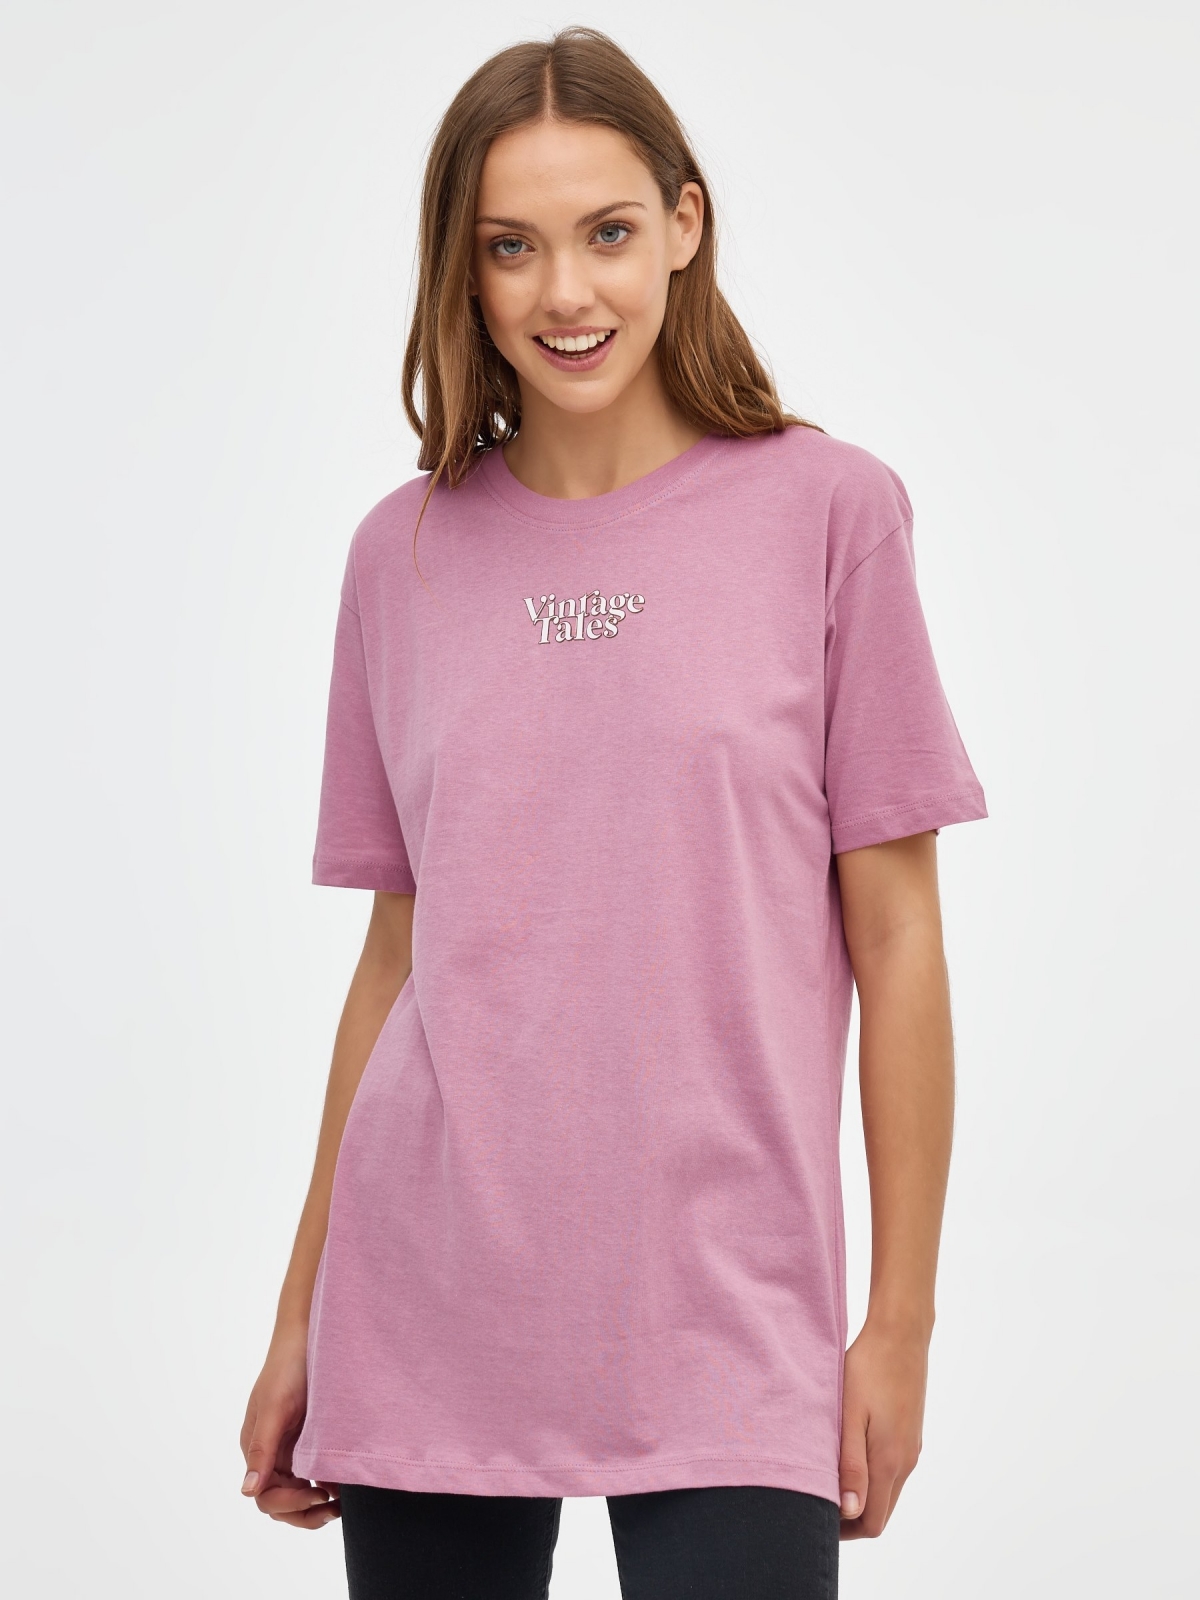 Oversized Mermaid T-shirt pink middle front view